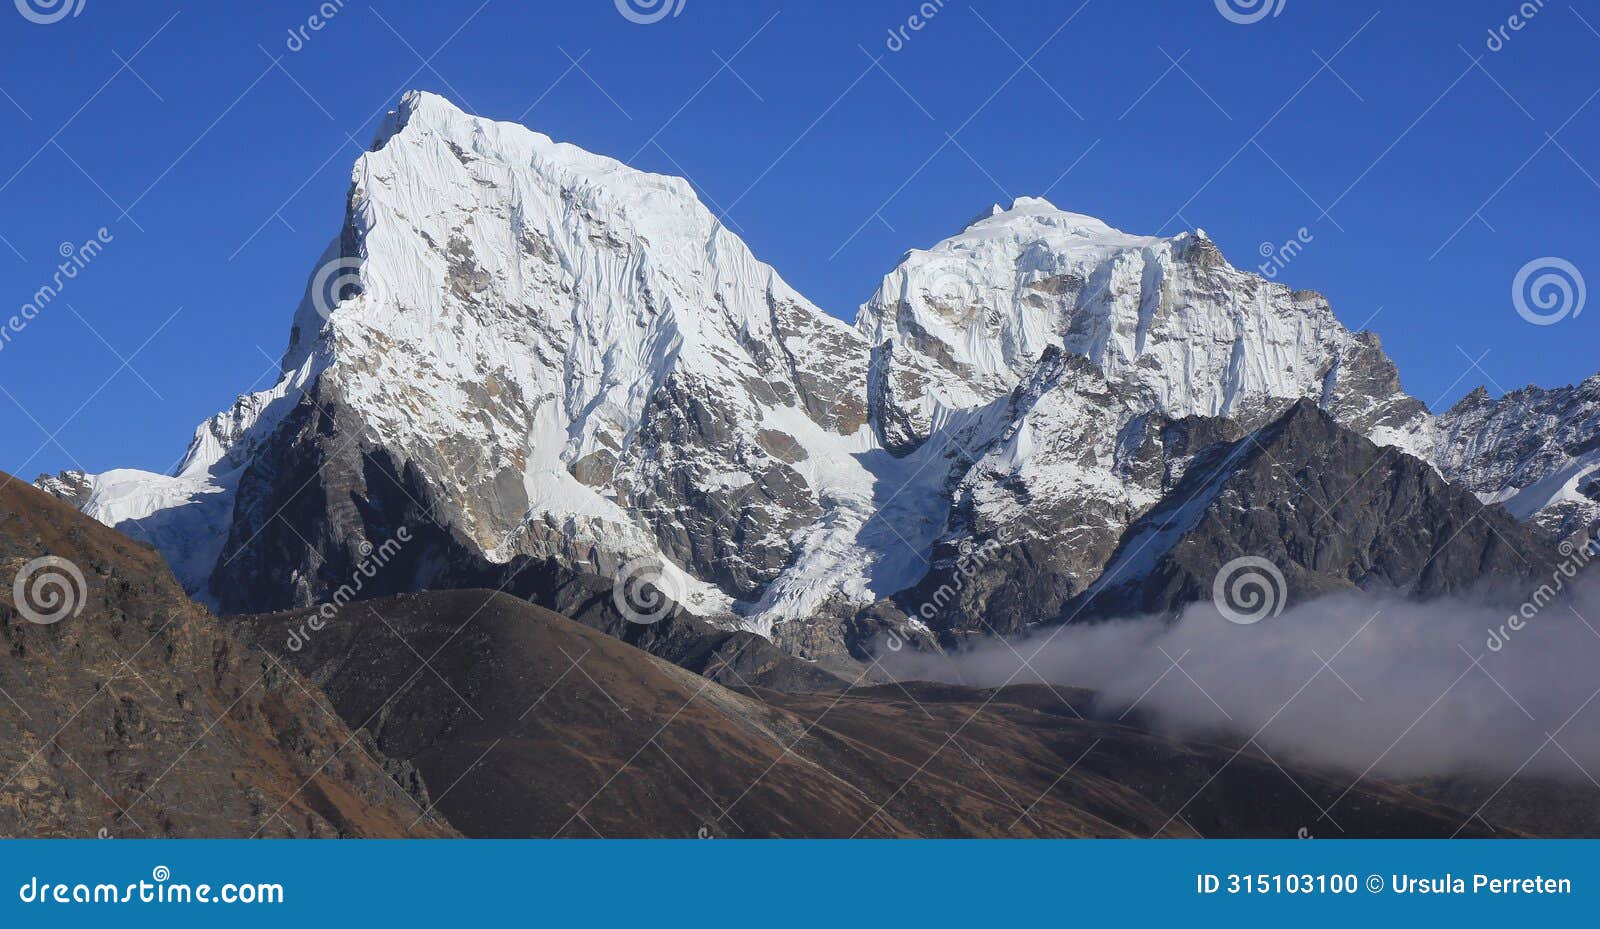 snow covered mountains cholatse and tobuch, view from the gokyo valley